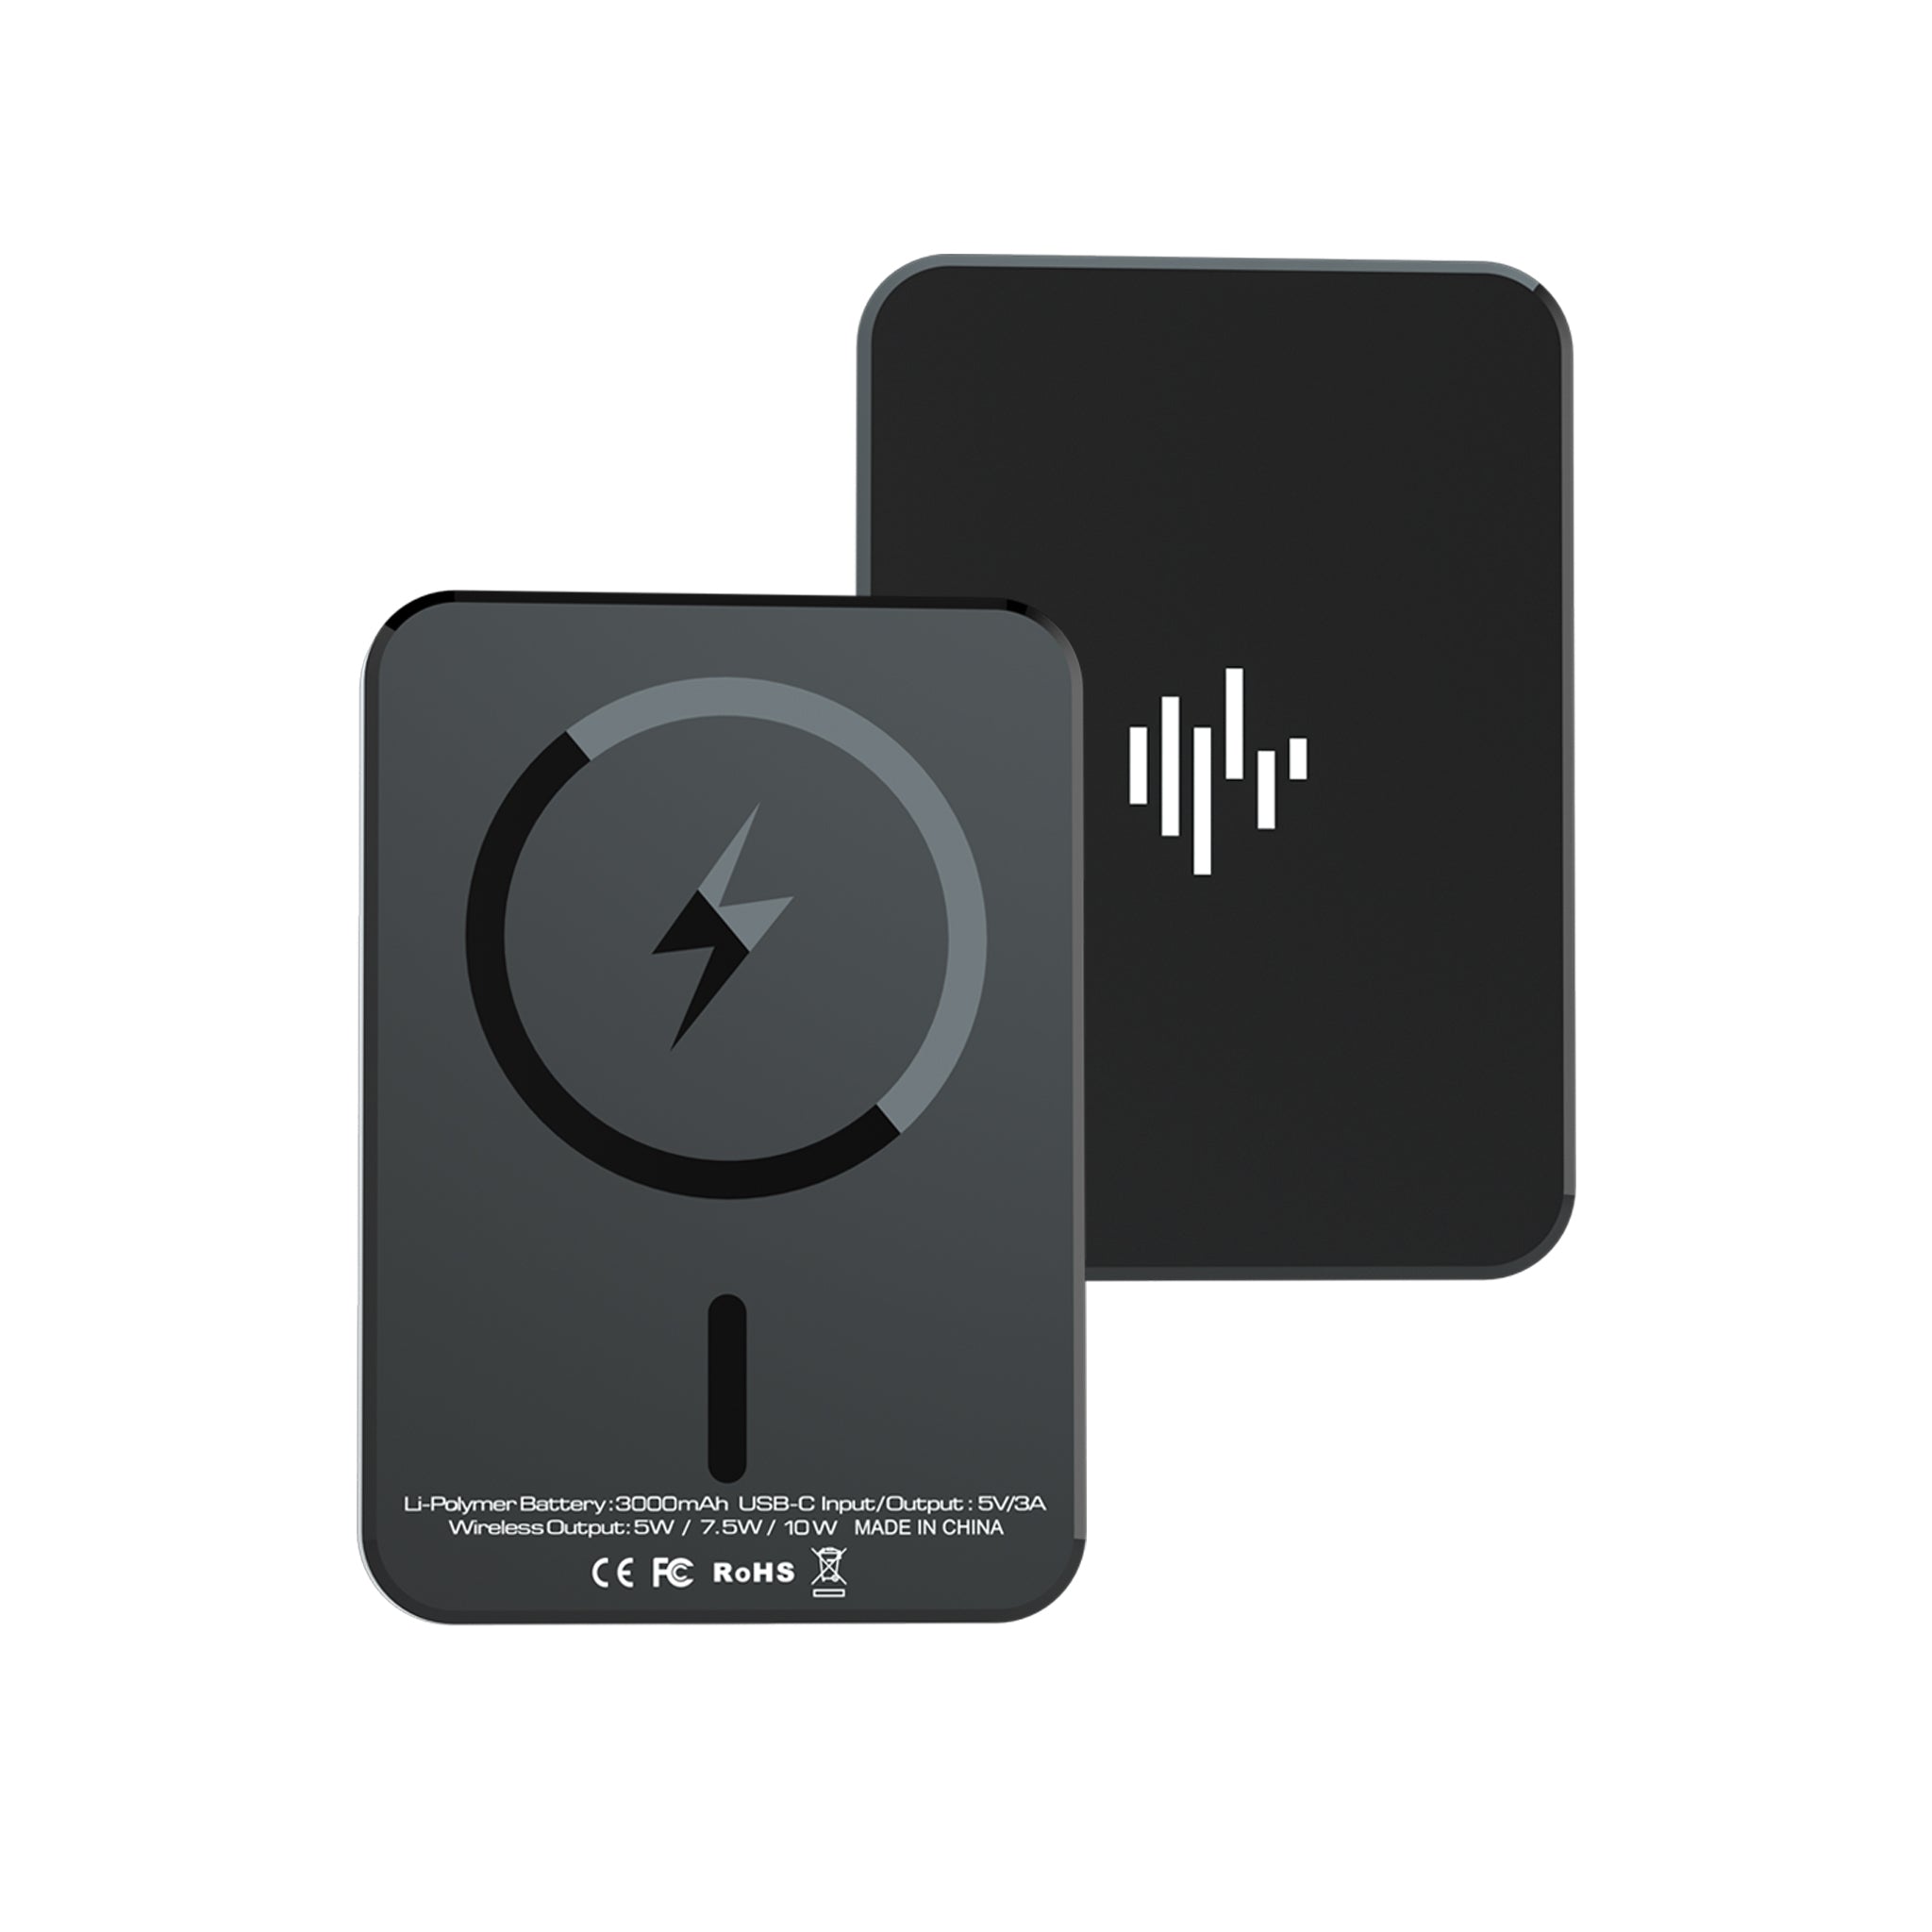 Pulse  | Magnetic | Power Pack